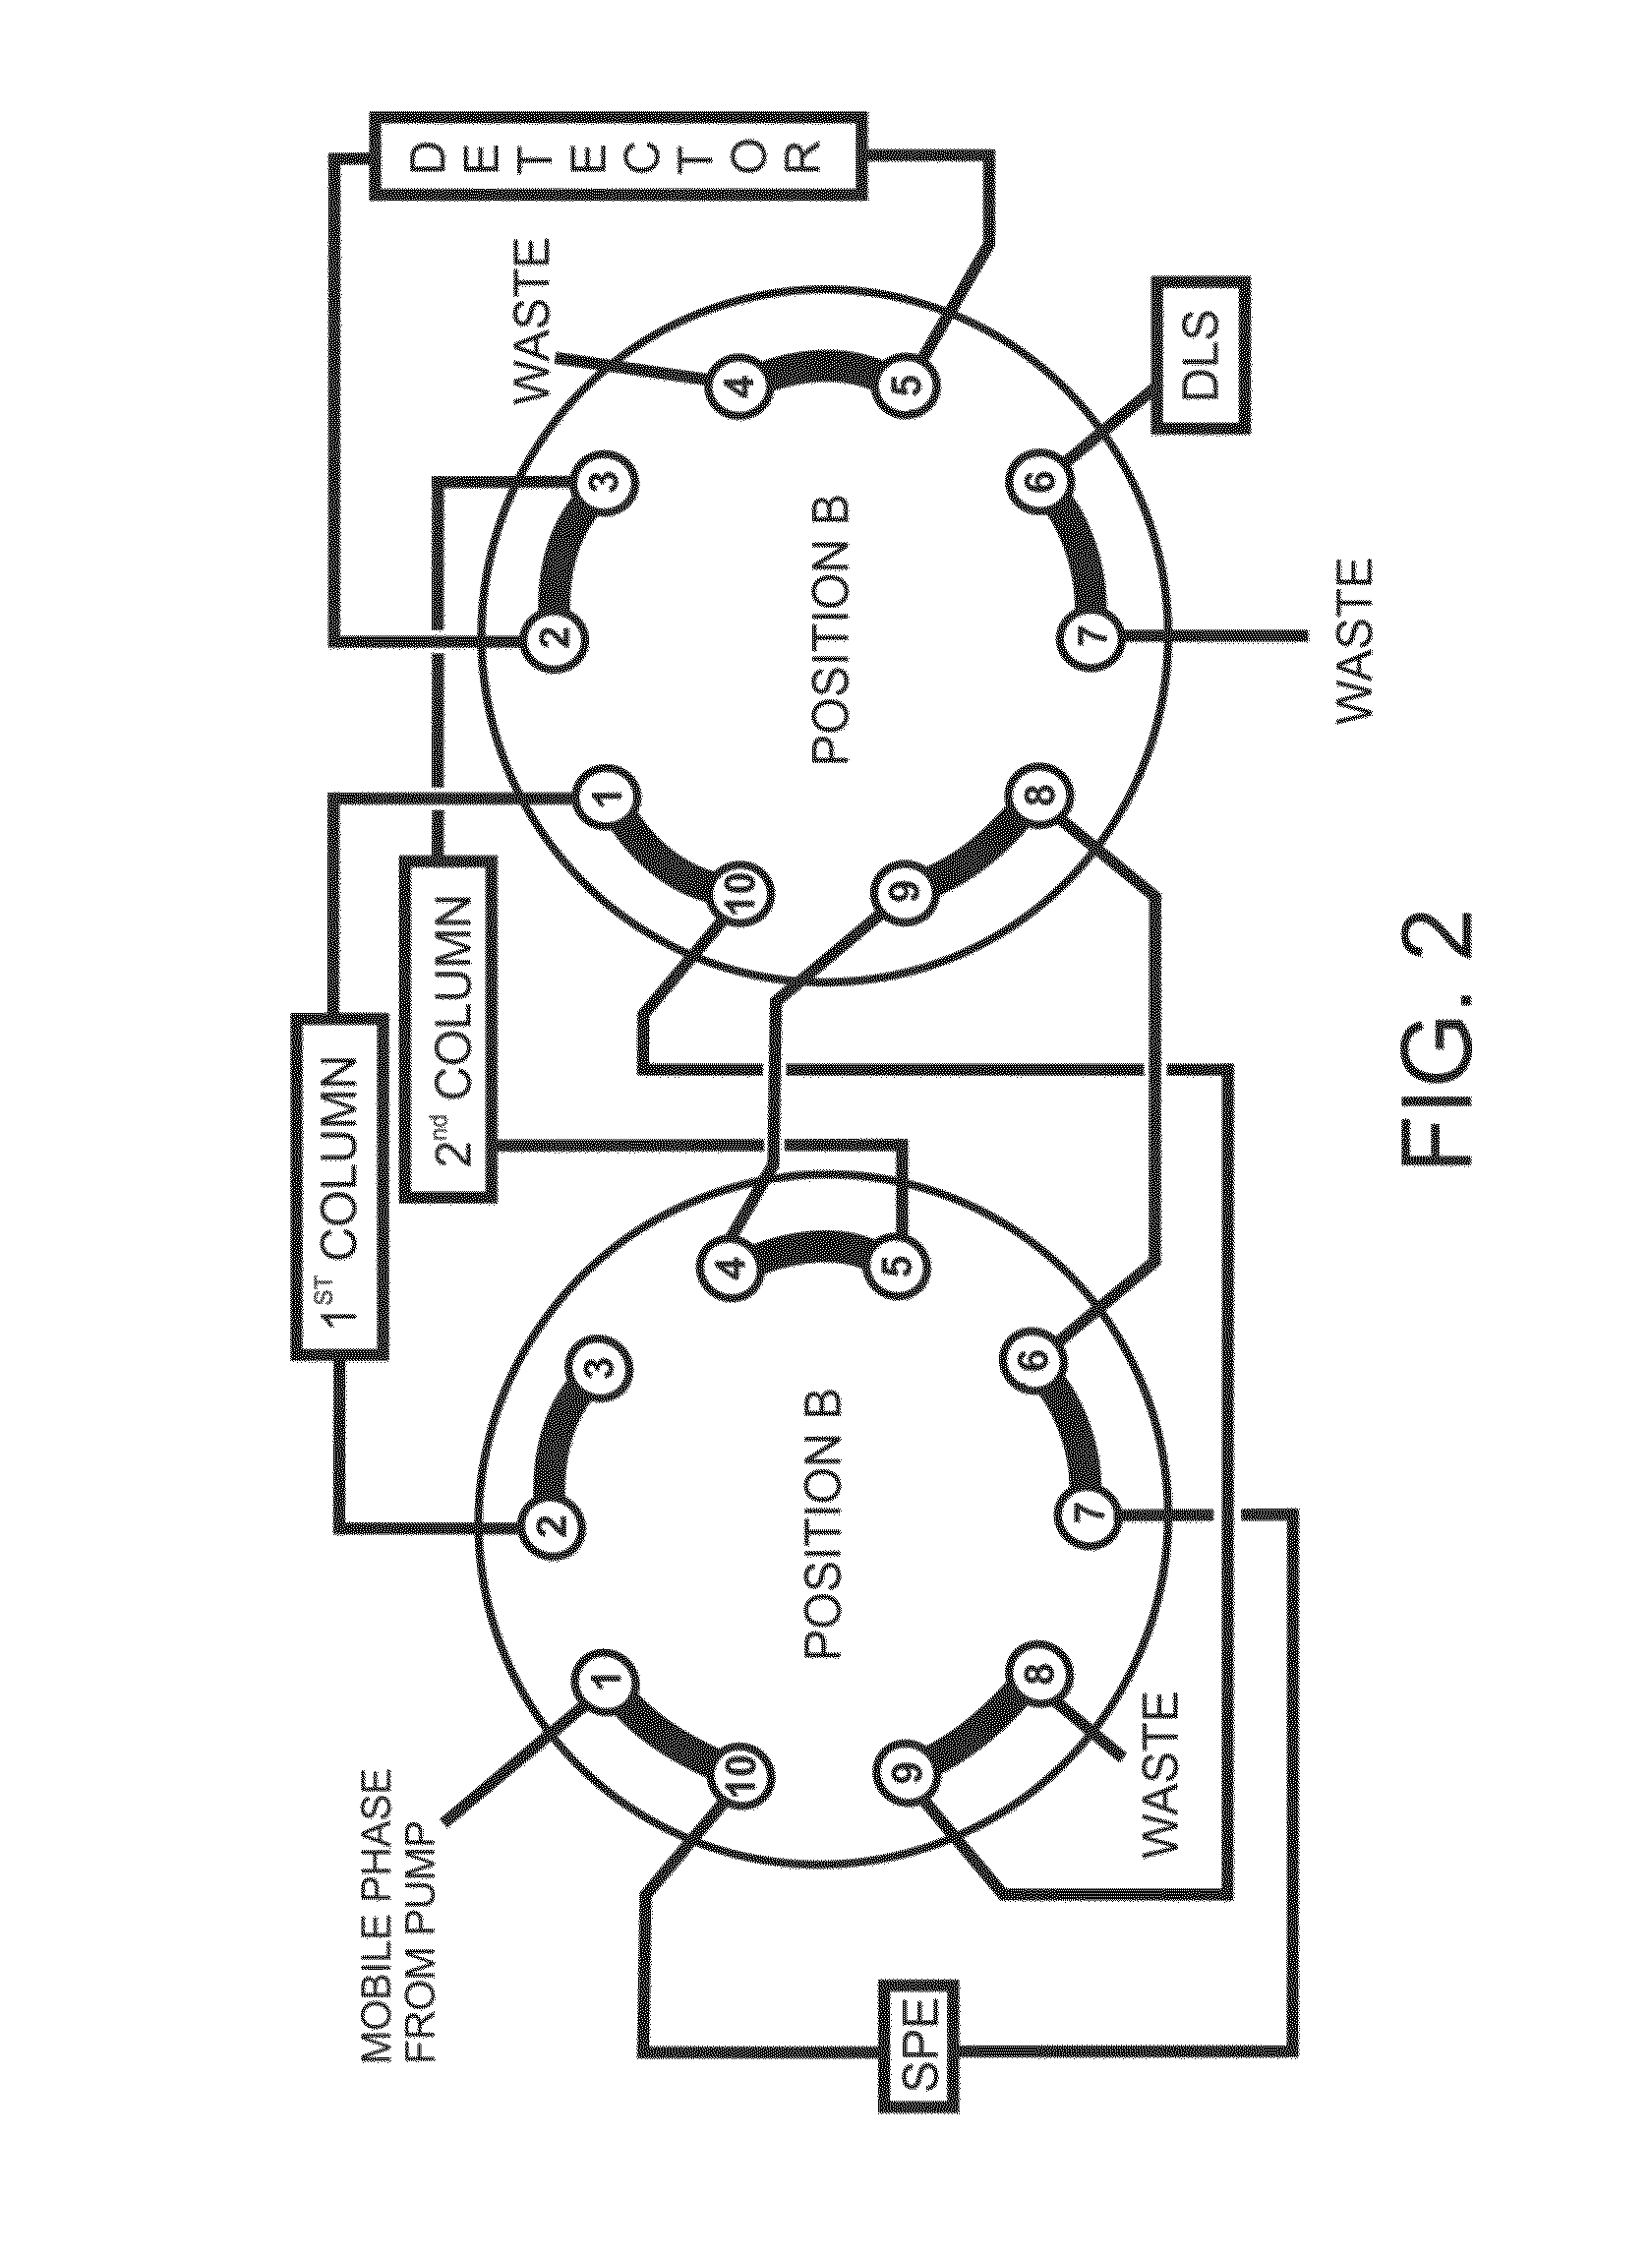 Method and apparatus for characterizing impurity profile of organic materials